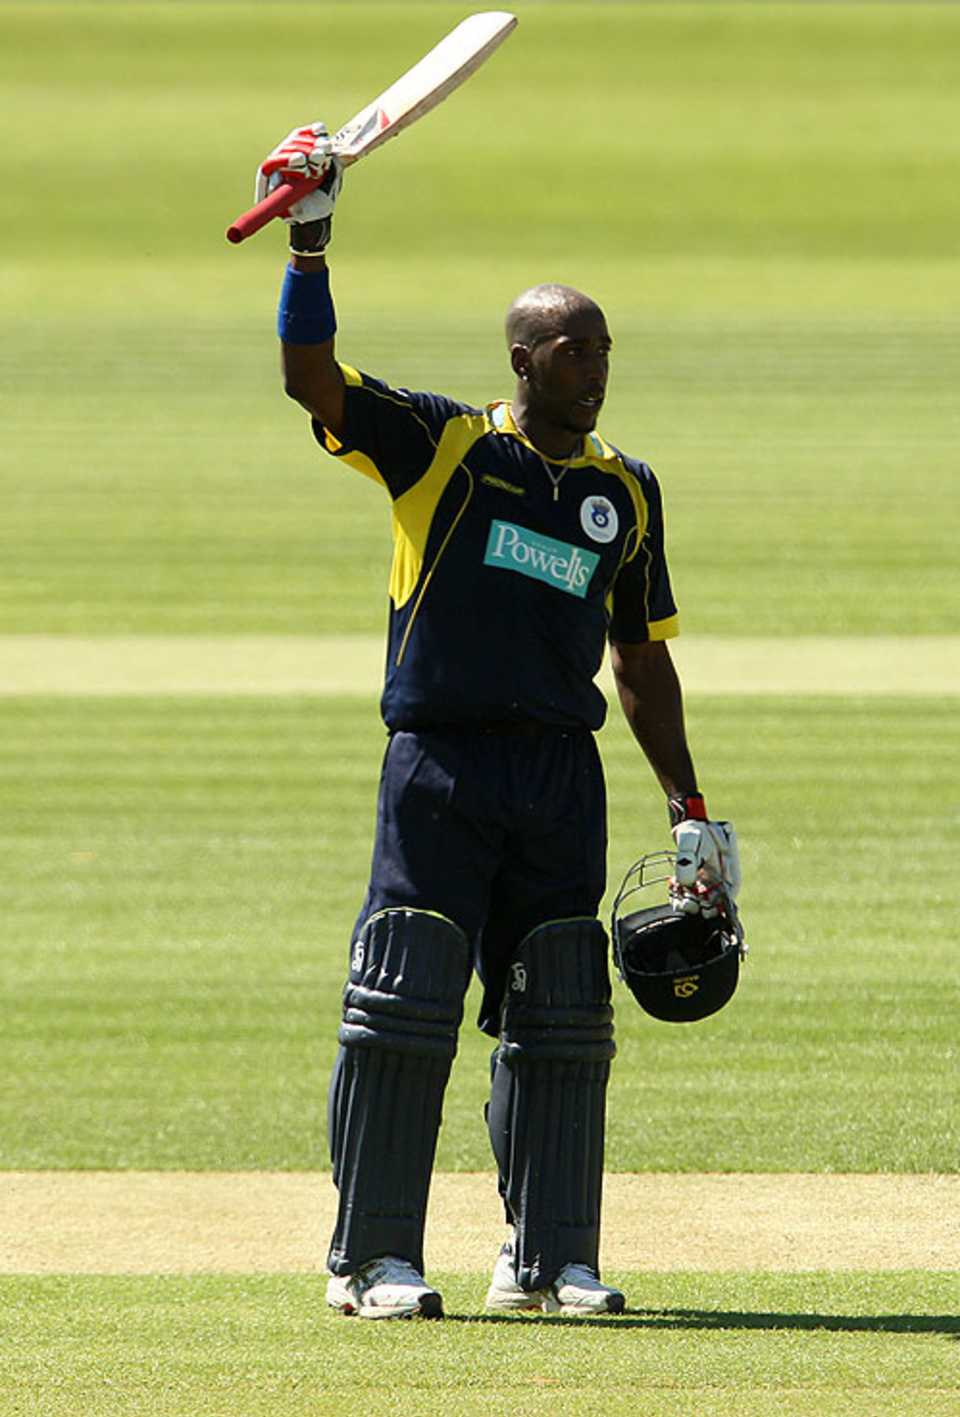 Michael Carberry's hundred came from just 64 balls, Warwickshire v Hampshire, Clydesdale Bank 40, May 22, 2010